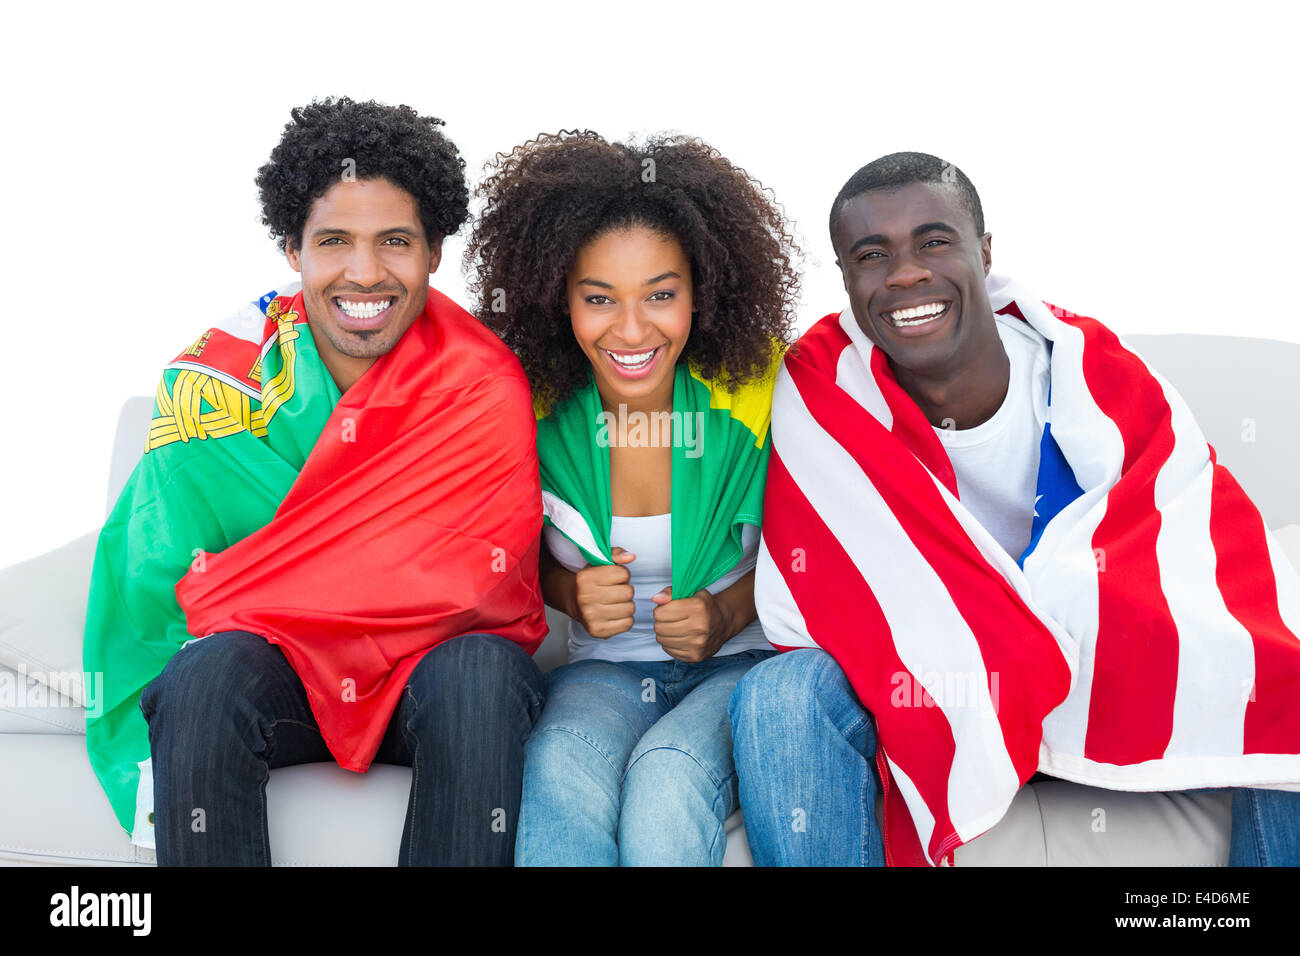 Happy fans wrapped in flags smiling at camera Stock Photo - Alamy